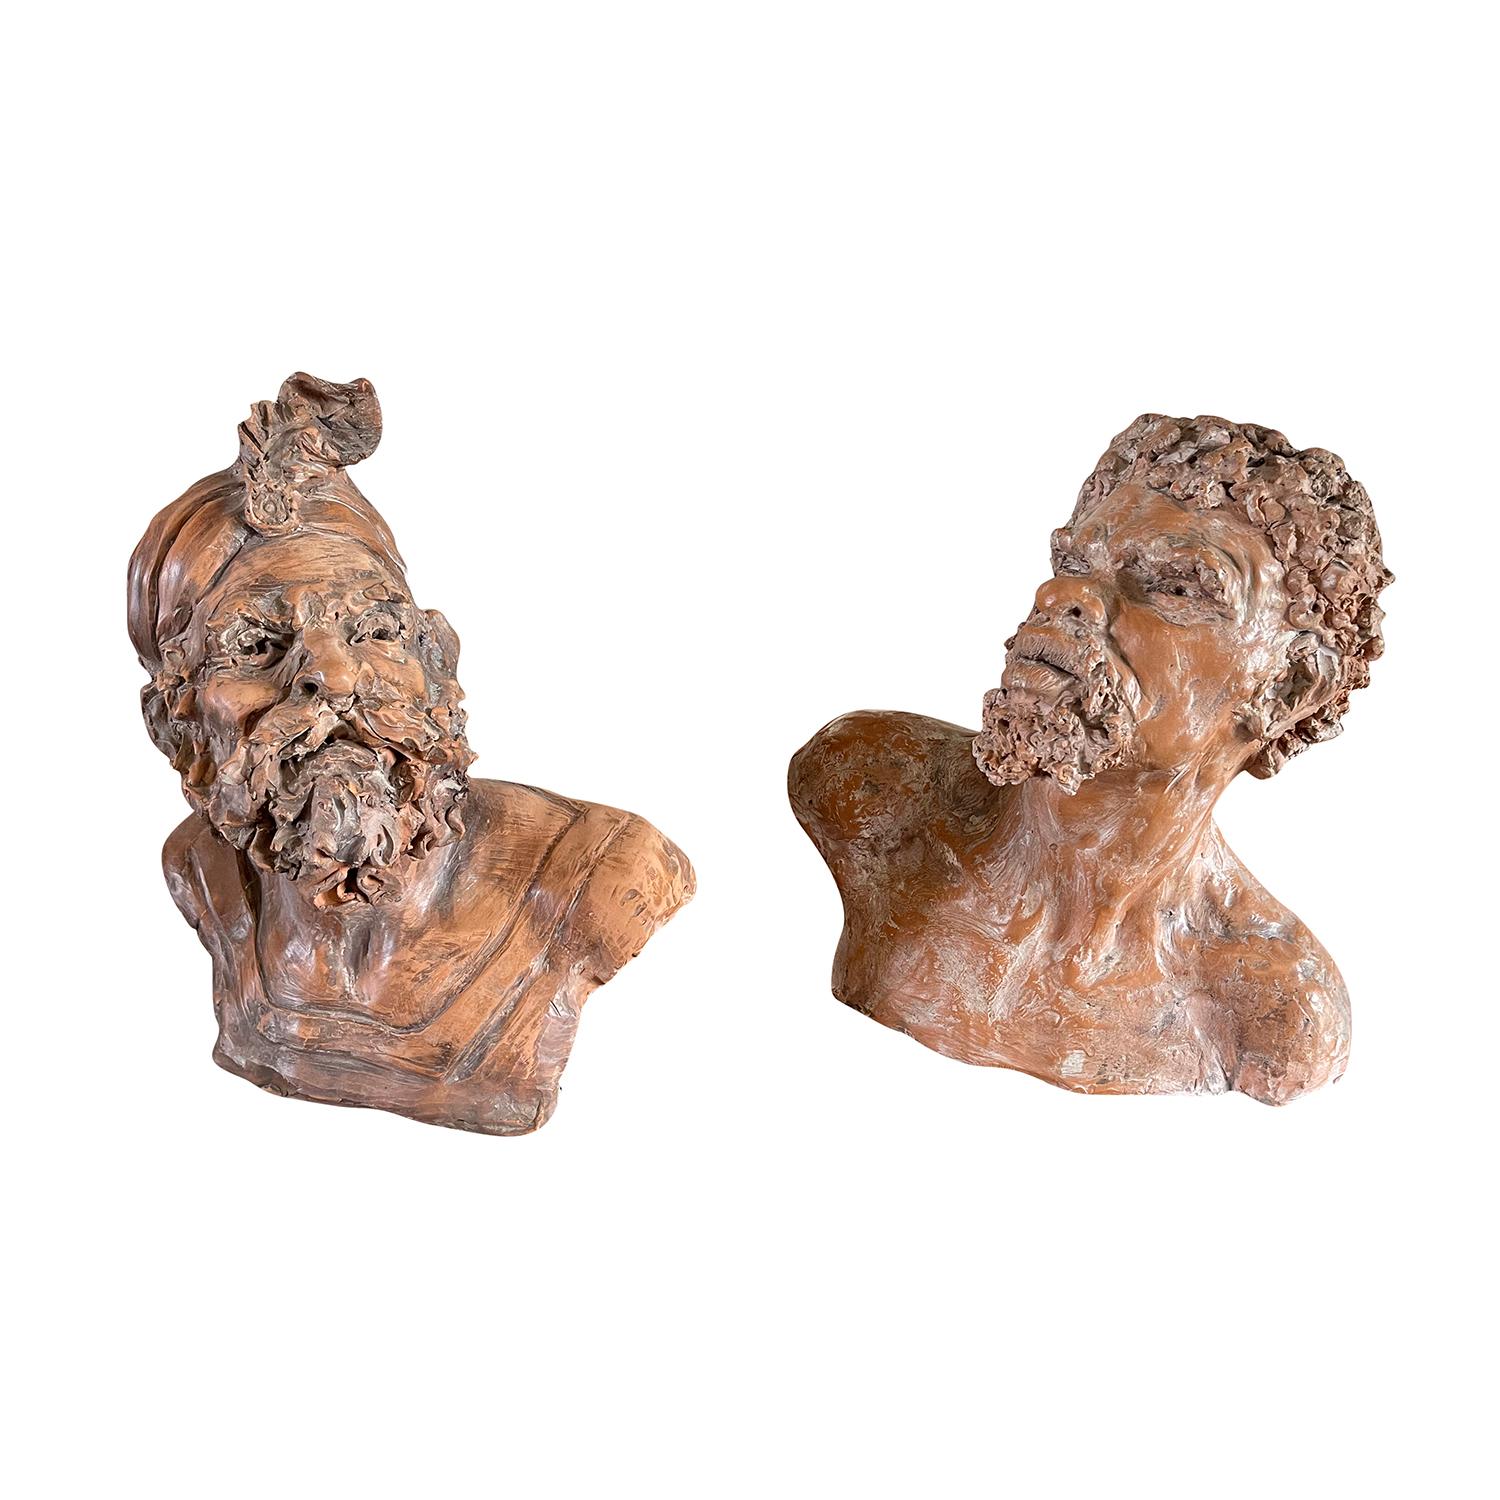 19th Century French Antique Pair of Terra Cotta Orientalist Busts In Good Condition For Sale In West Palm Beach, FL